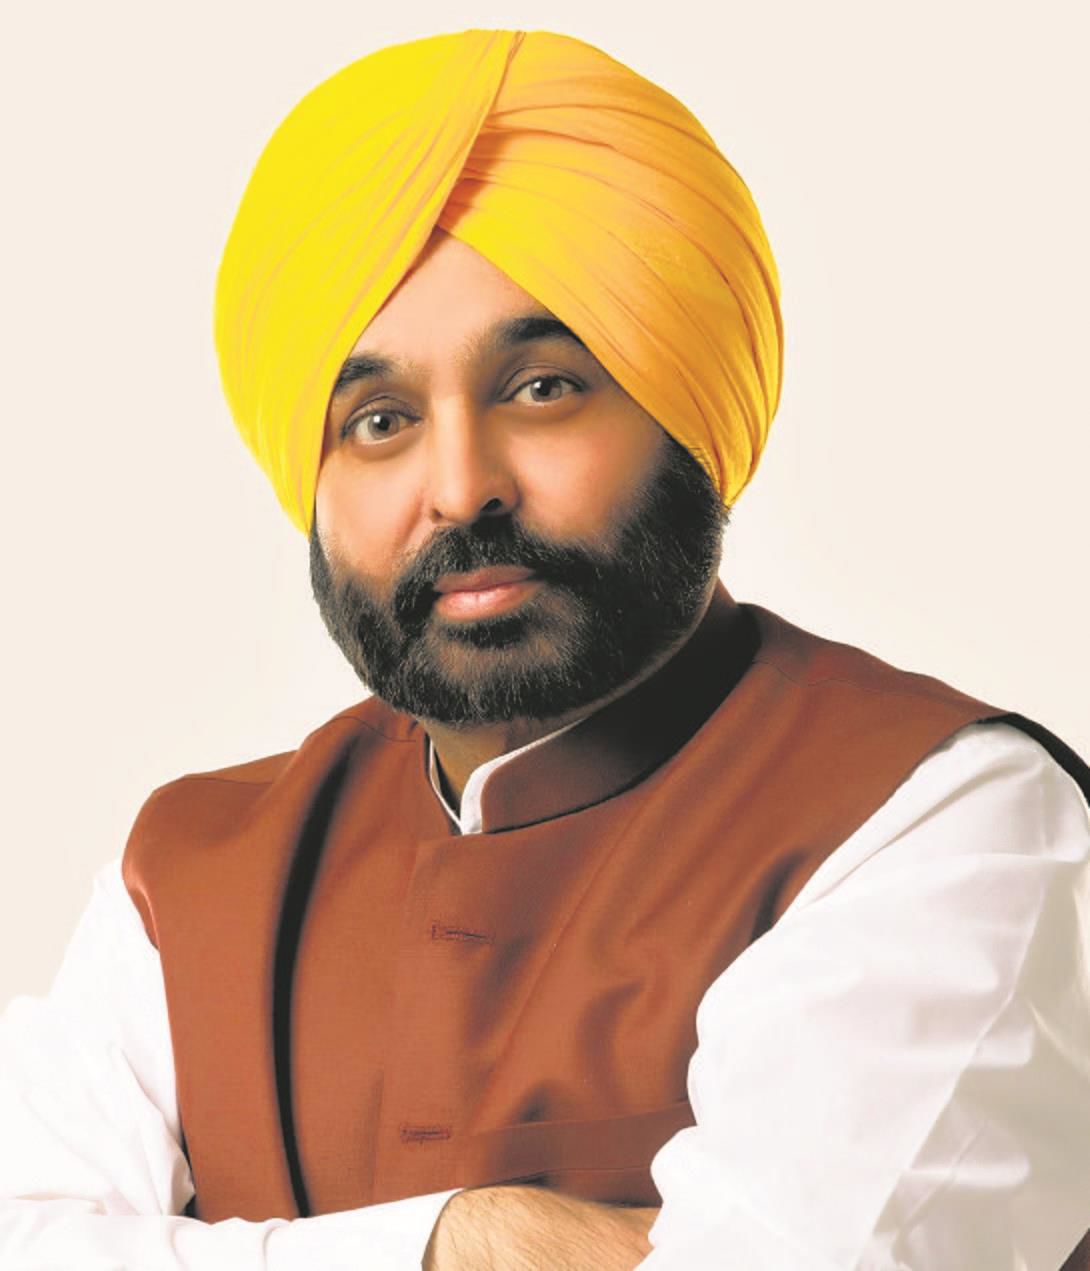 Members of teachers’ unions await meeting with CM Bhagwant Mann, detained